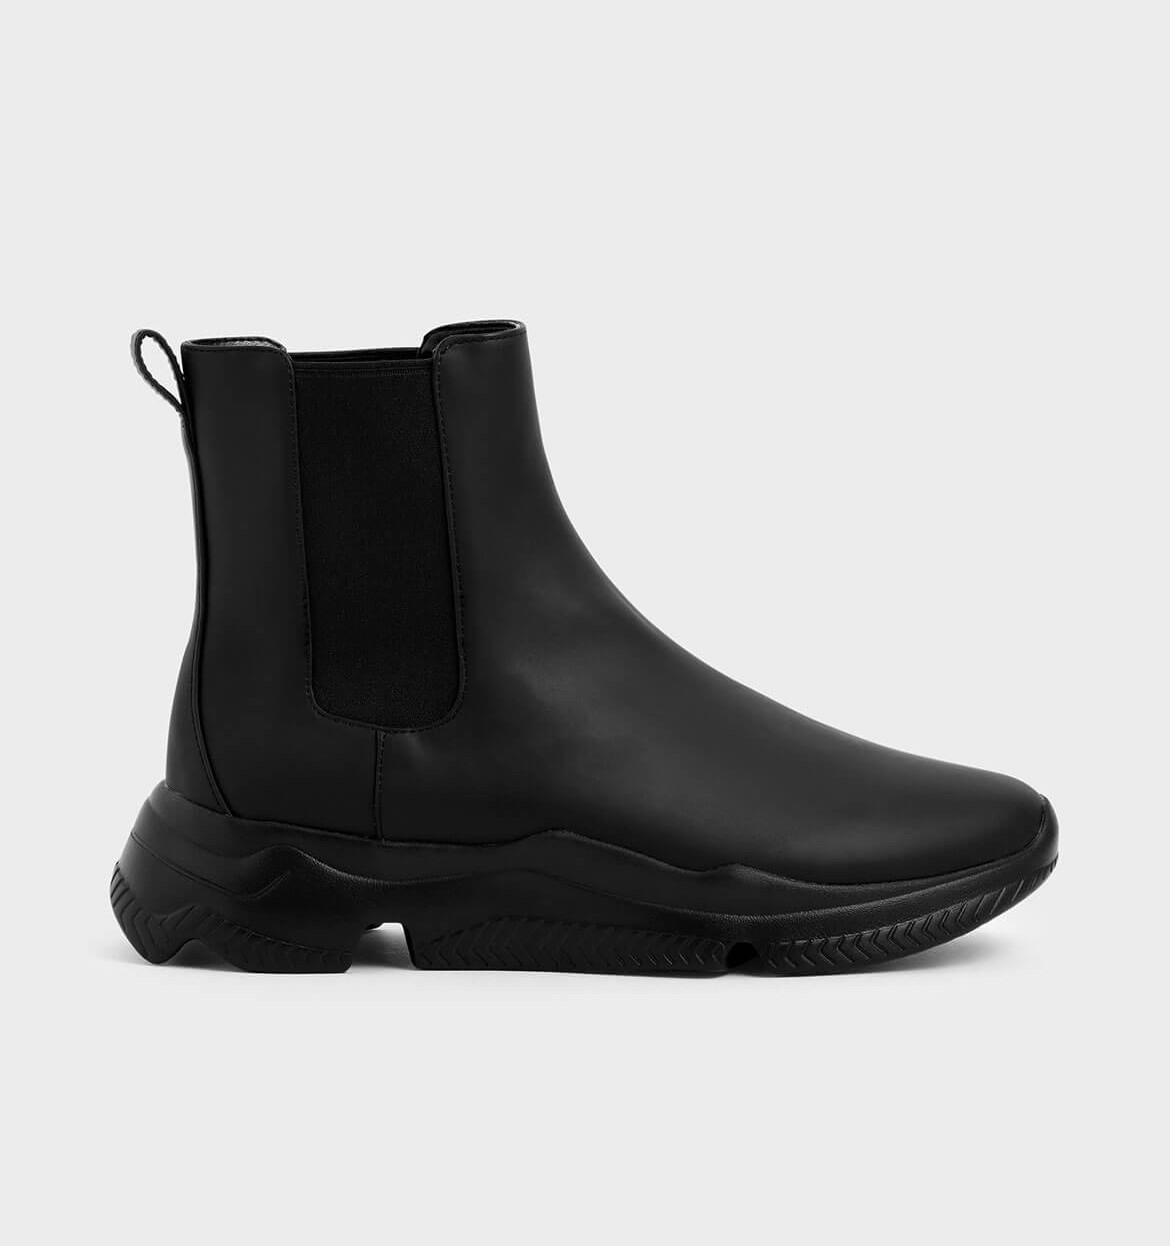 Cute Boots for Women Under $100 